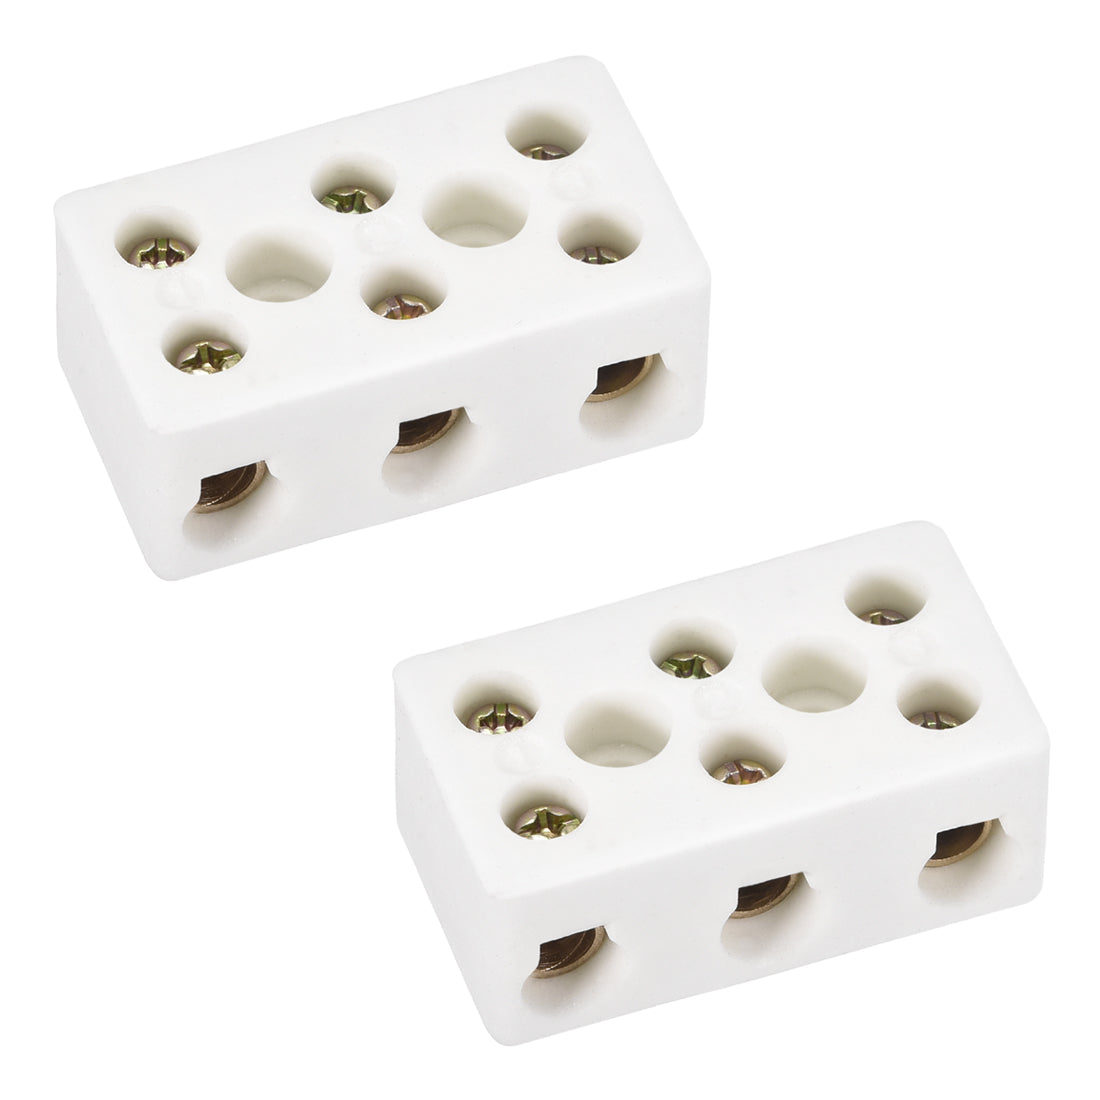 uxcell Uxcell 3 Way Ceramics Terminal Blocks High Temp Porcelain Ceramic Connectors 47x27.5x19.5mm for Electrical Wire Cable 2 Pcs